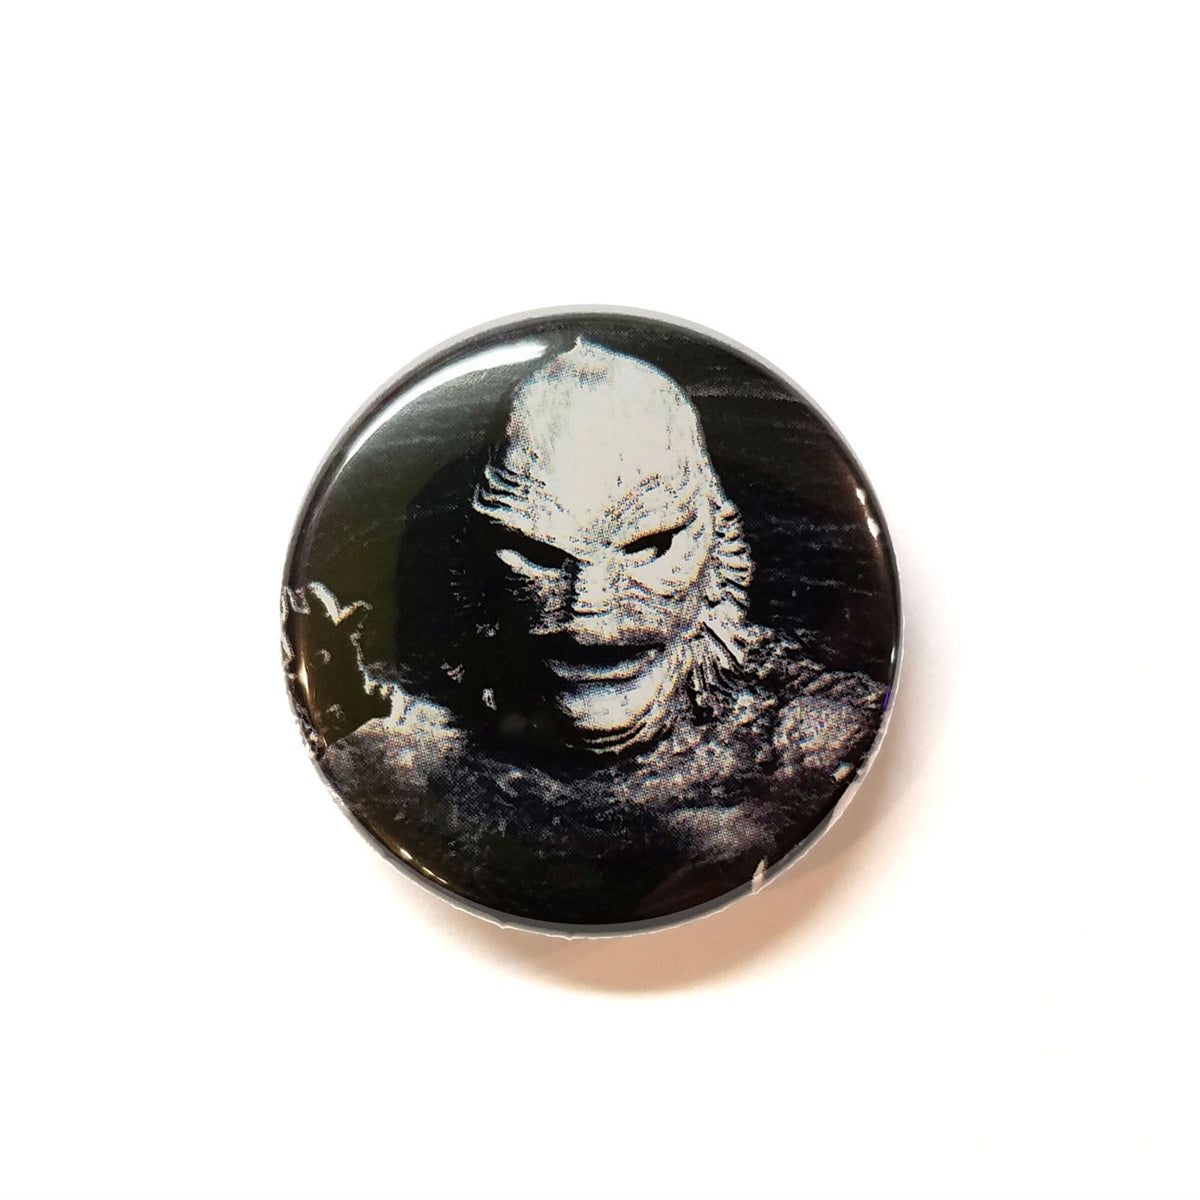 black and white photo portrait image of the Creature from the Black Lagoon monster movie character on 1.5" round metal pinback button